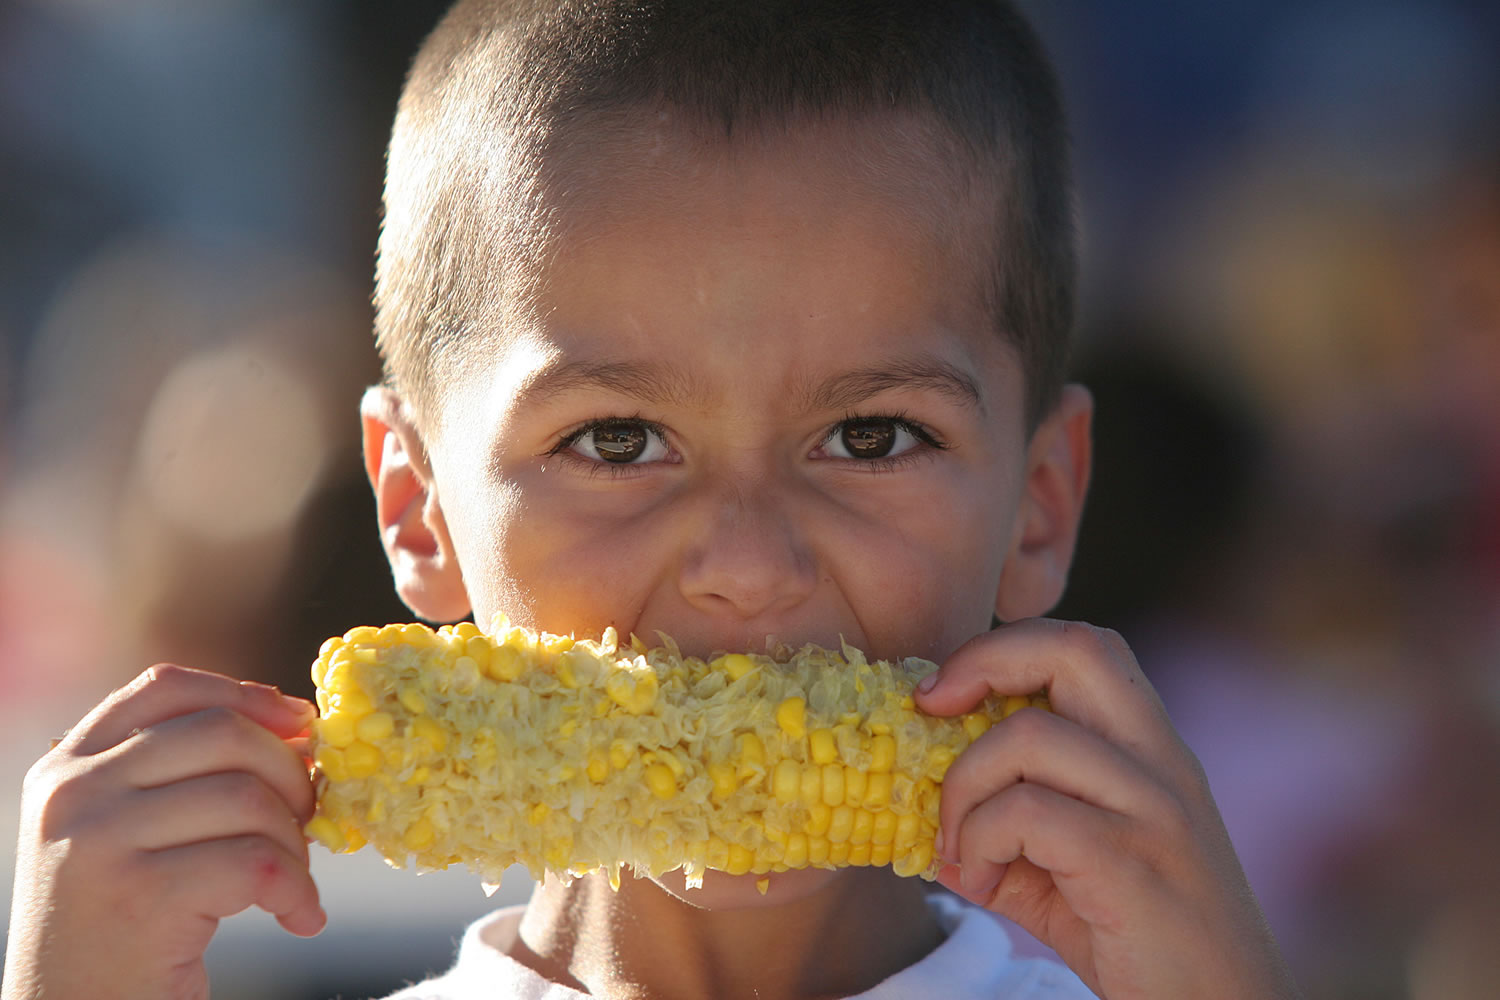 The Vancouver Sausage Festival plans to go through 7,000 ears of corn this year.